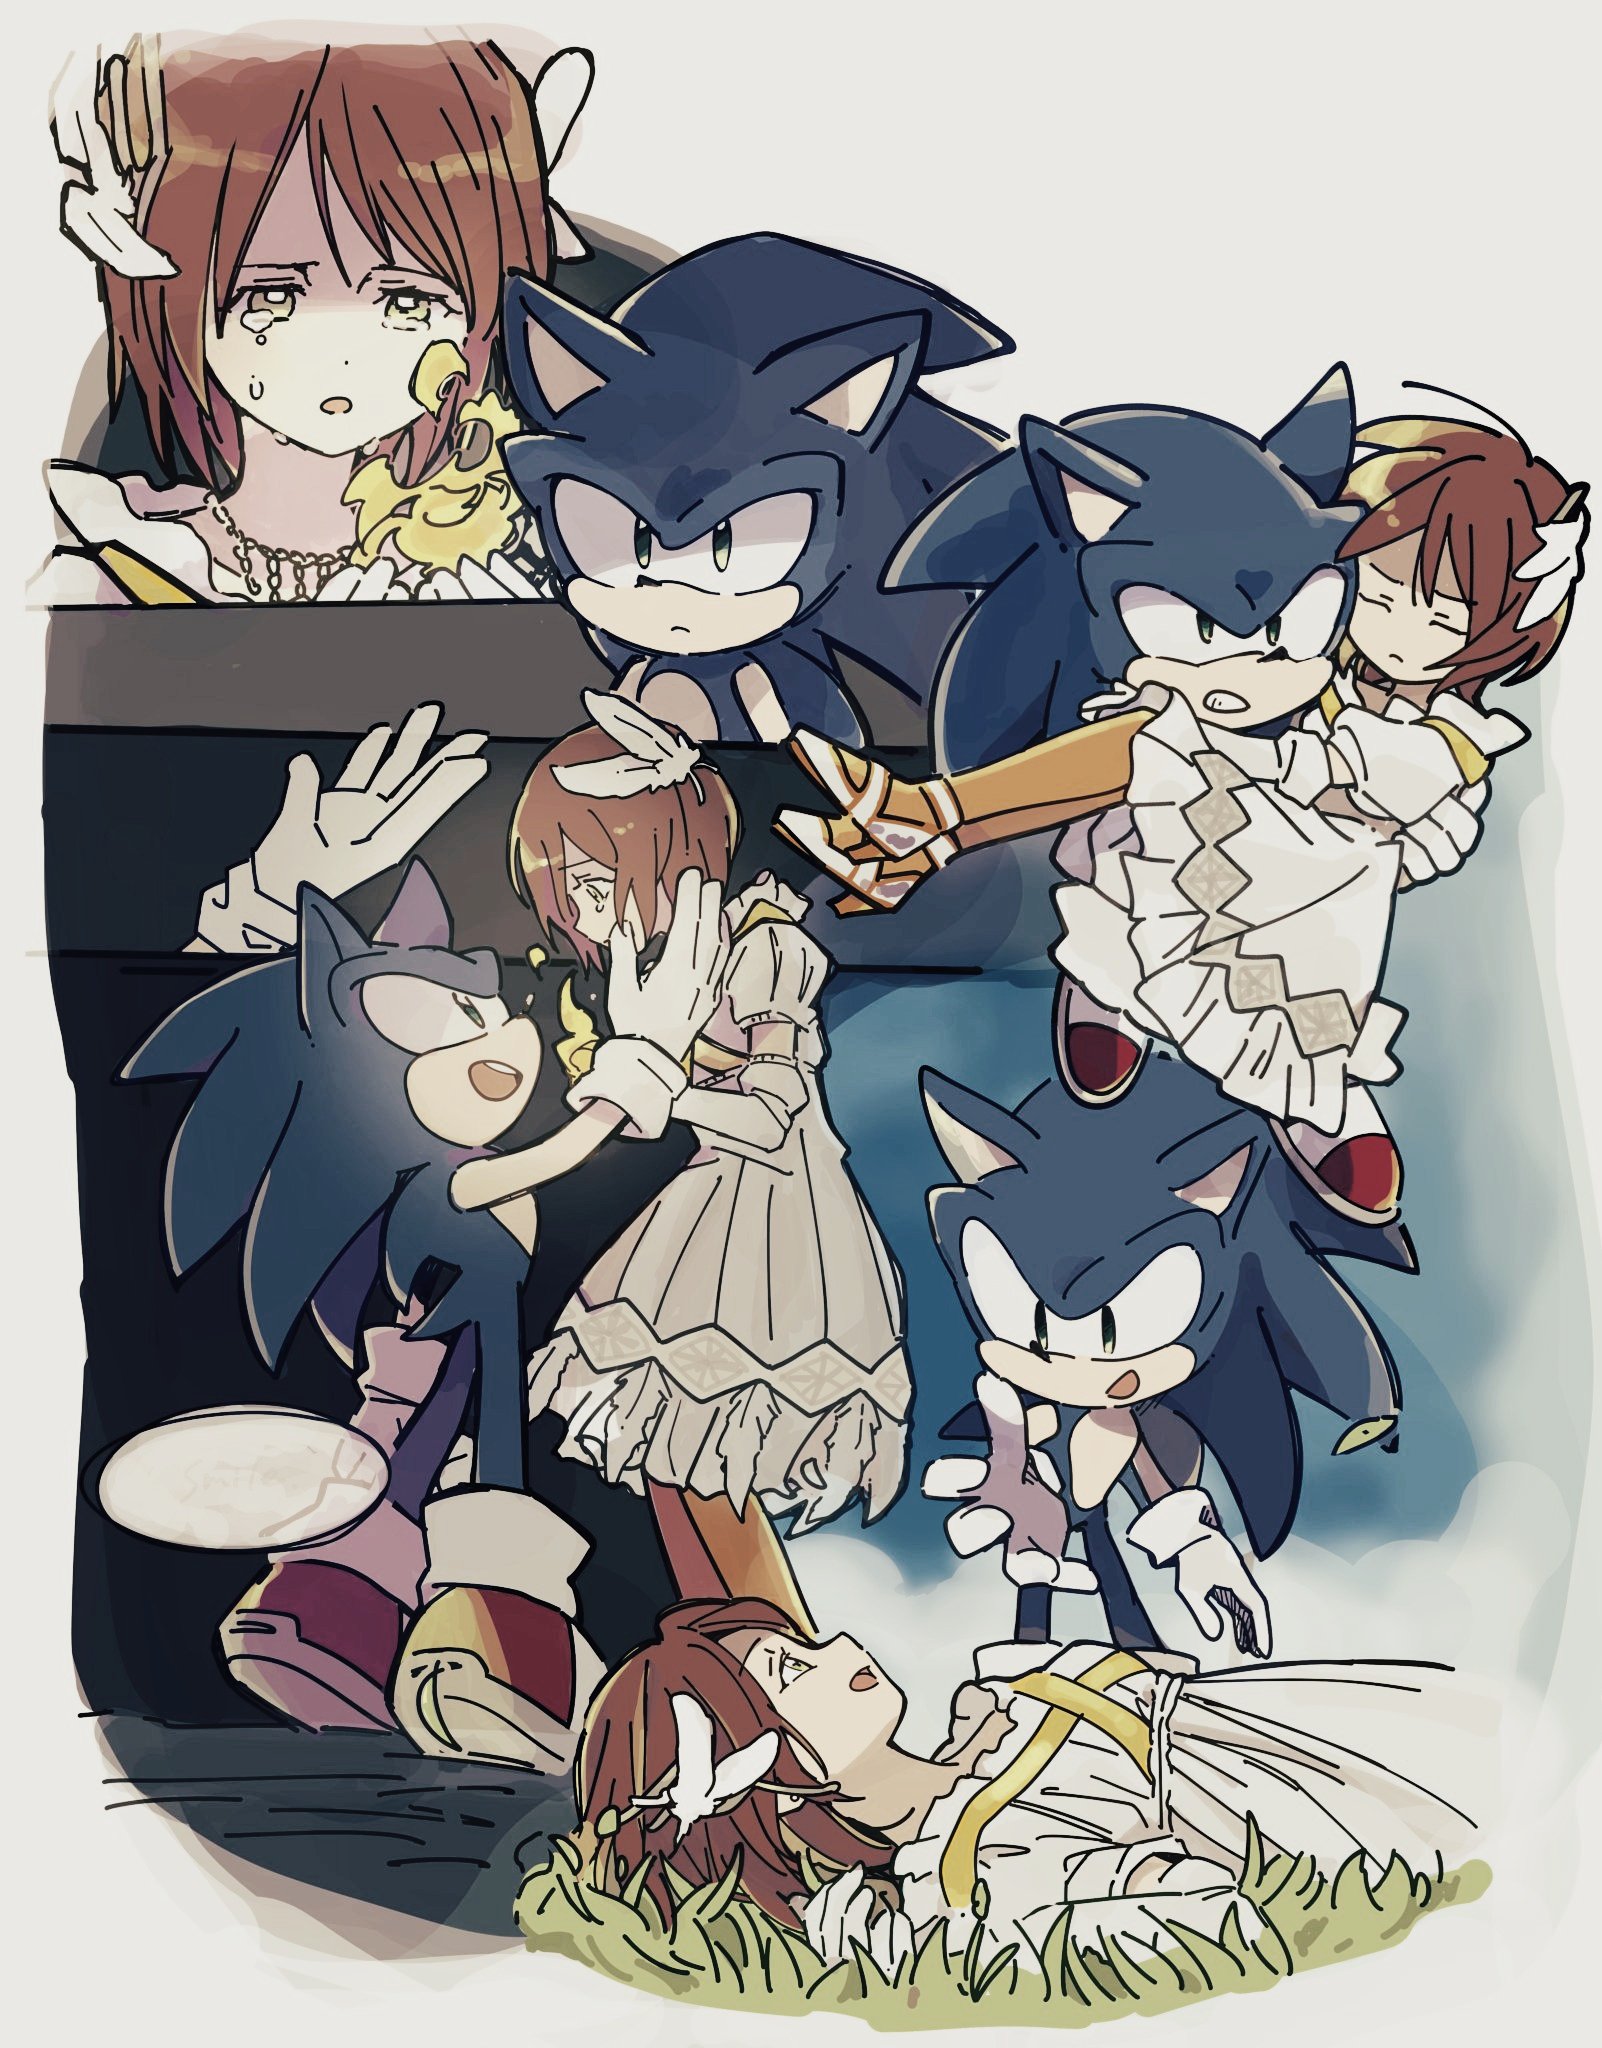 LukCan on X: Sonic the Hedgehog carrying Princess Elise the